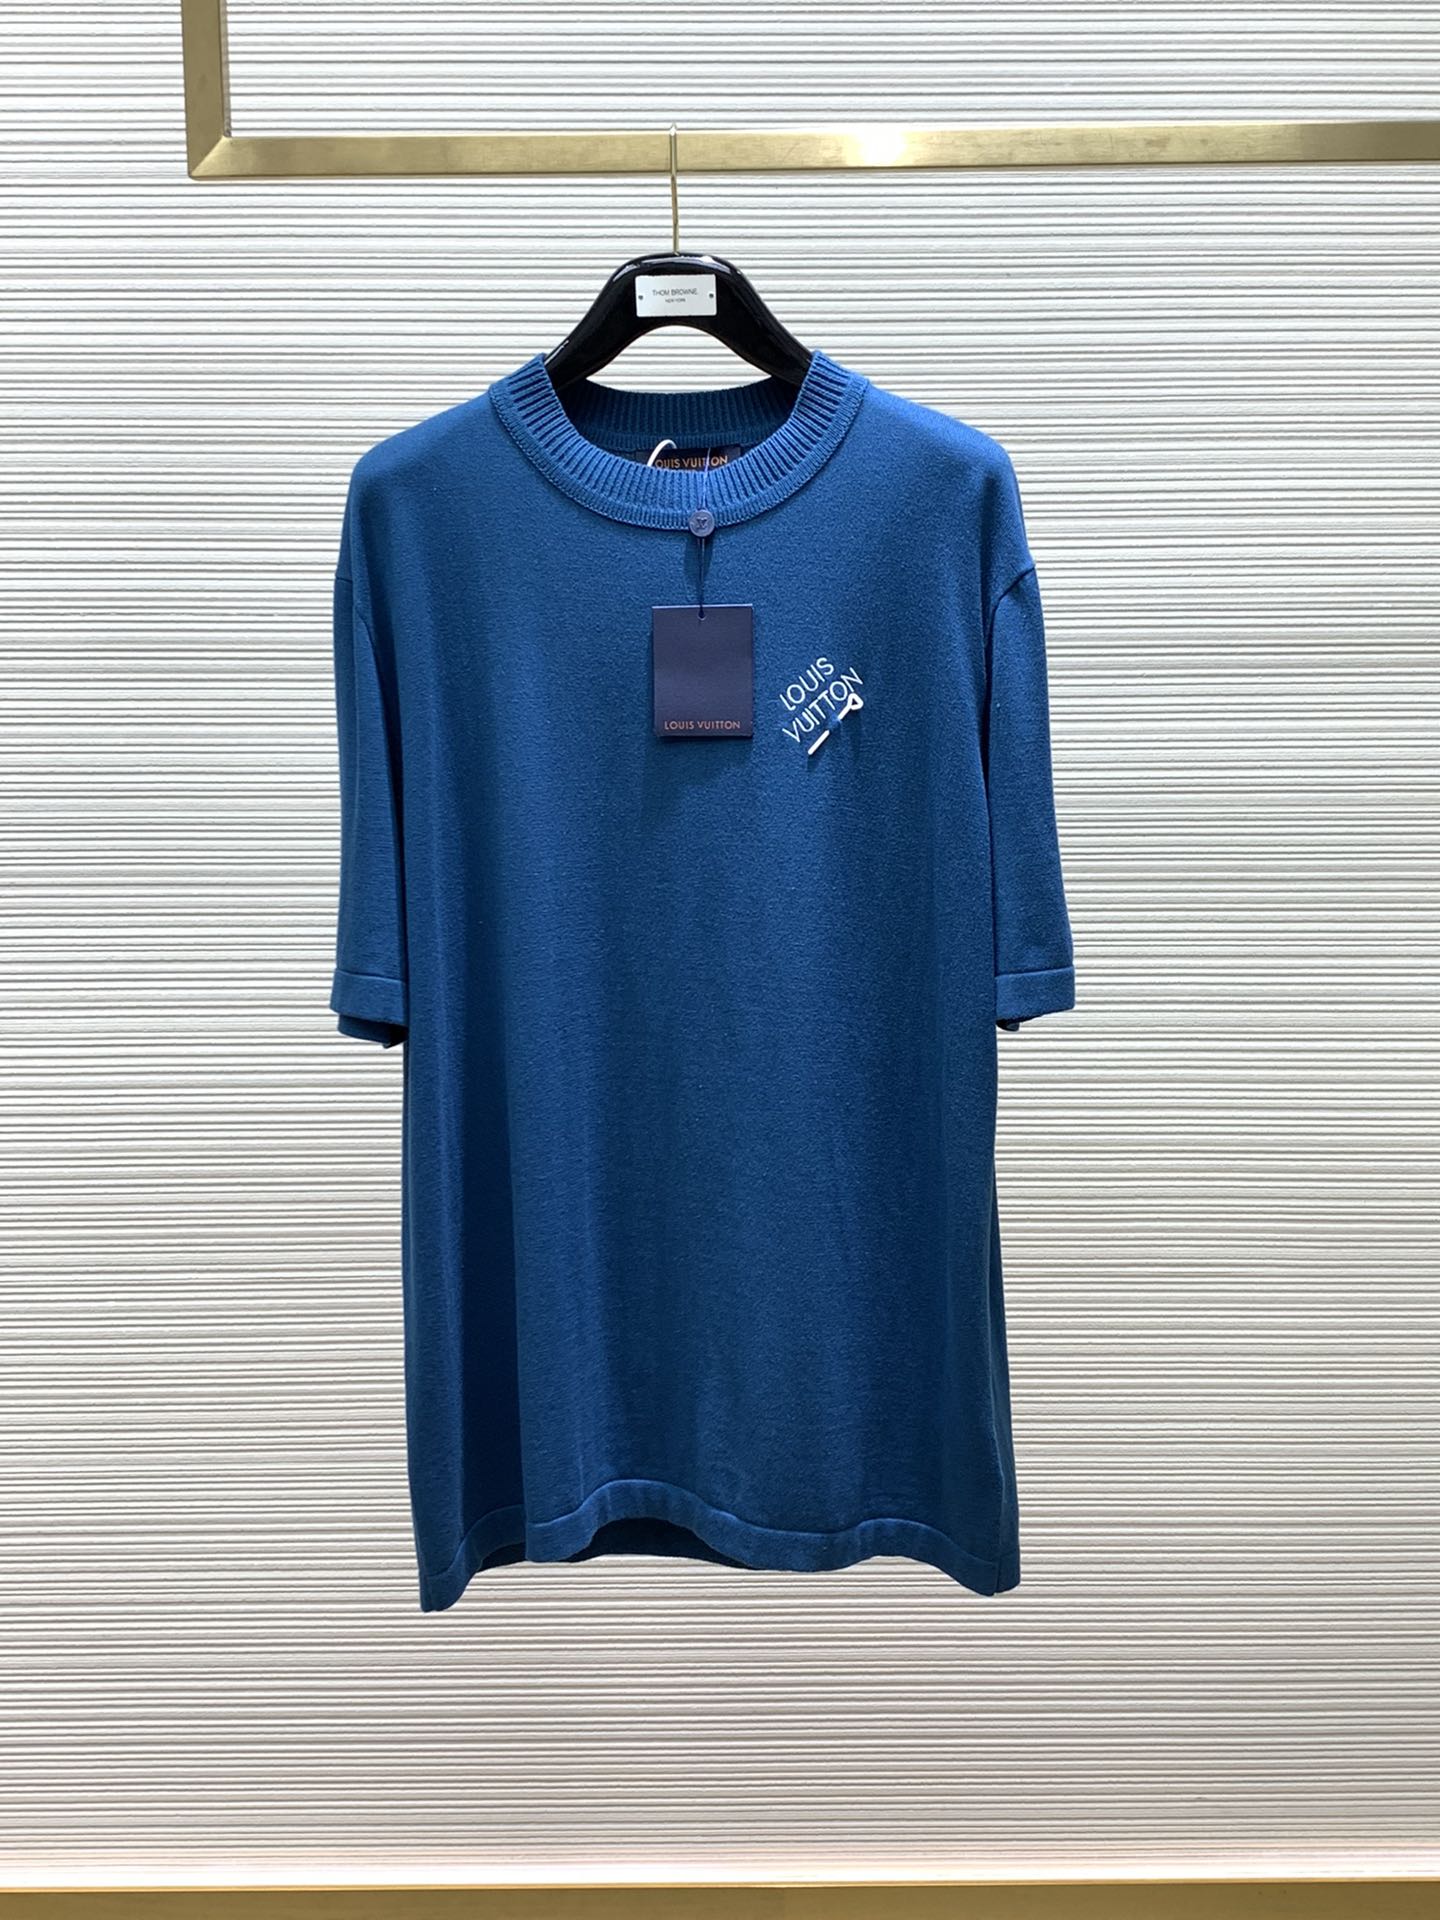 Louis Vuitton Clothing T-Shirt Embroidery Knitting Spring/Summer Collection Fashion Casual